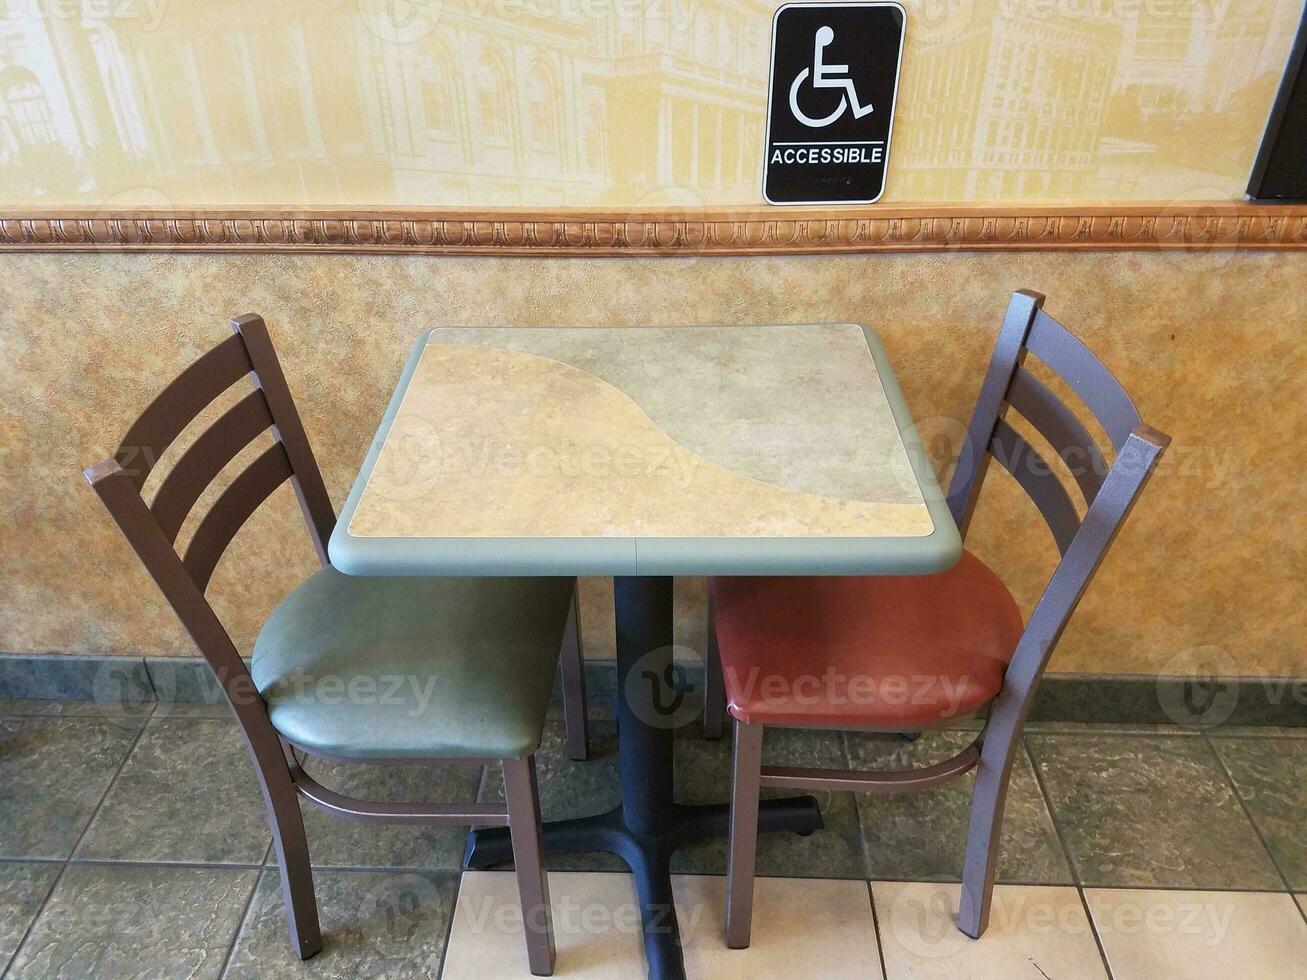 accessible sign near table photo